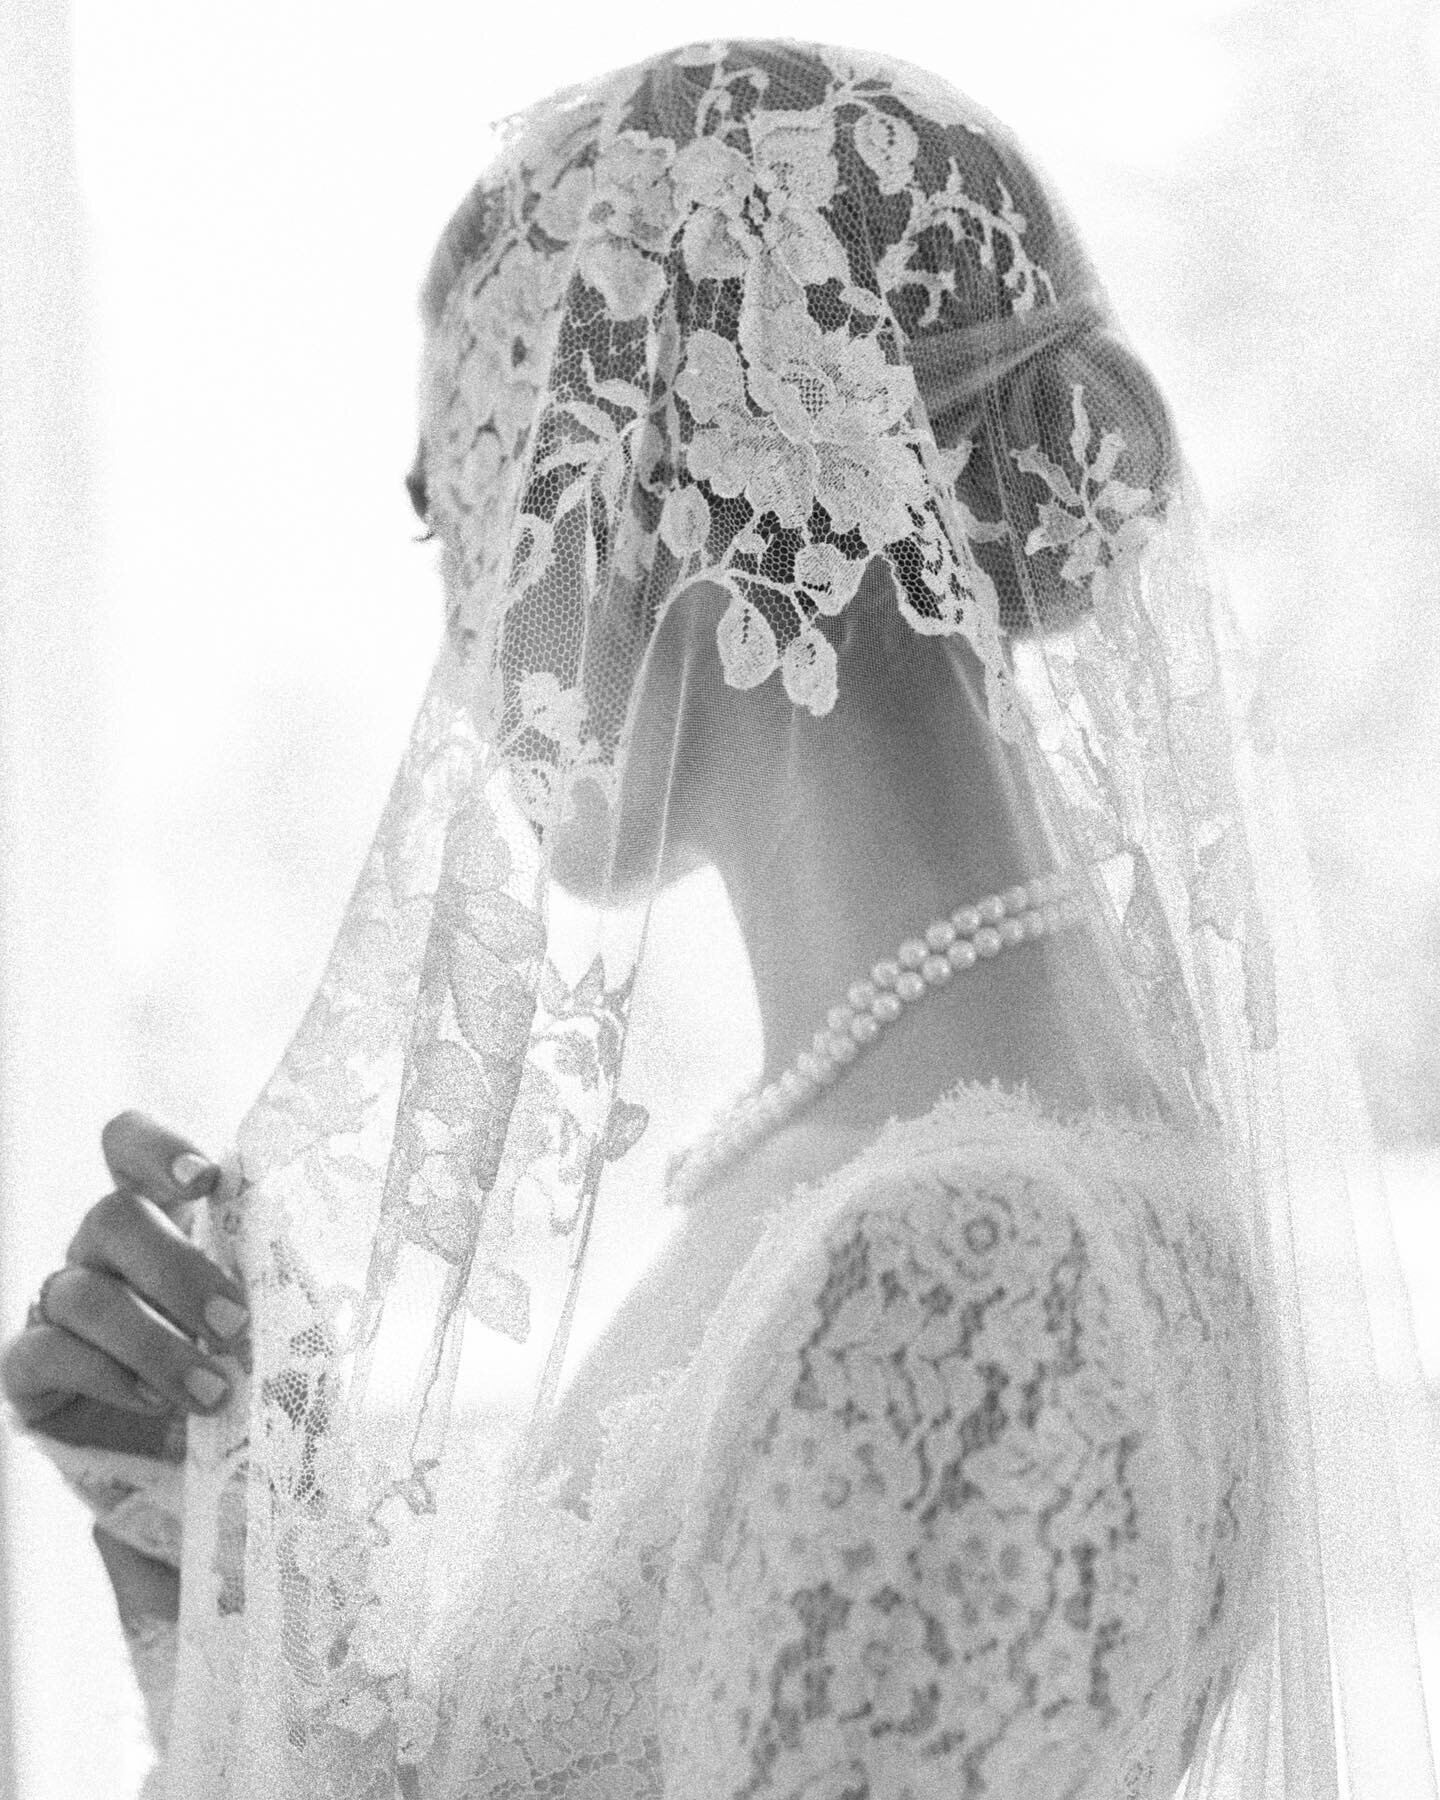 In love with our vintage italian bride-
a vision in lace @elainafagan, gown by @moniquelhuillier 

@lakecomoweddings @villadestelakecomo @dagnushka